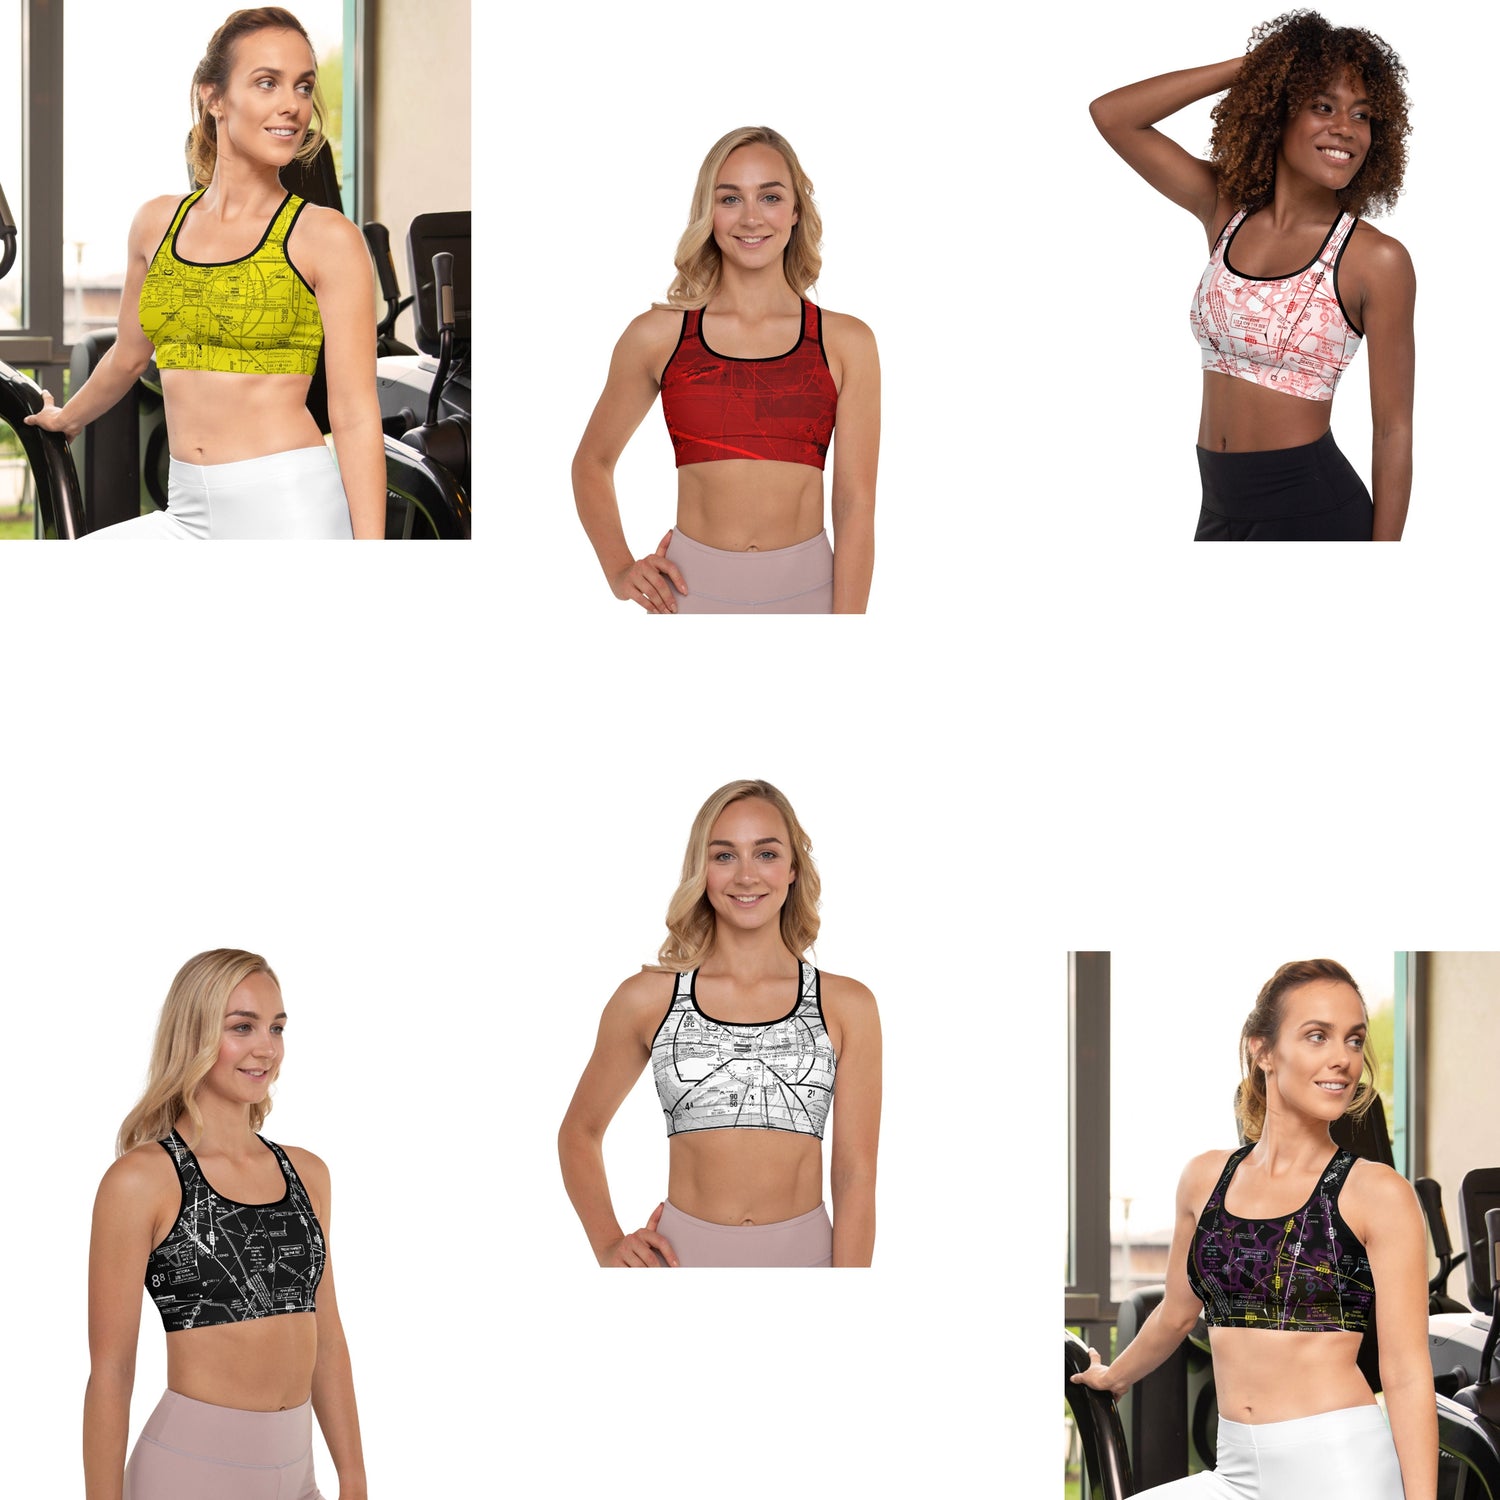 Aviation themed colorful sports bras